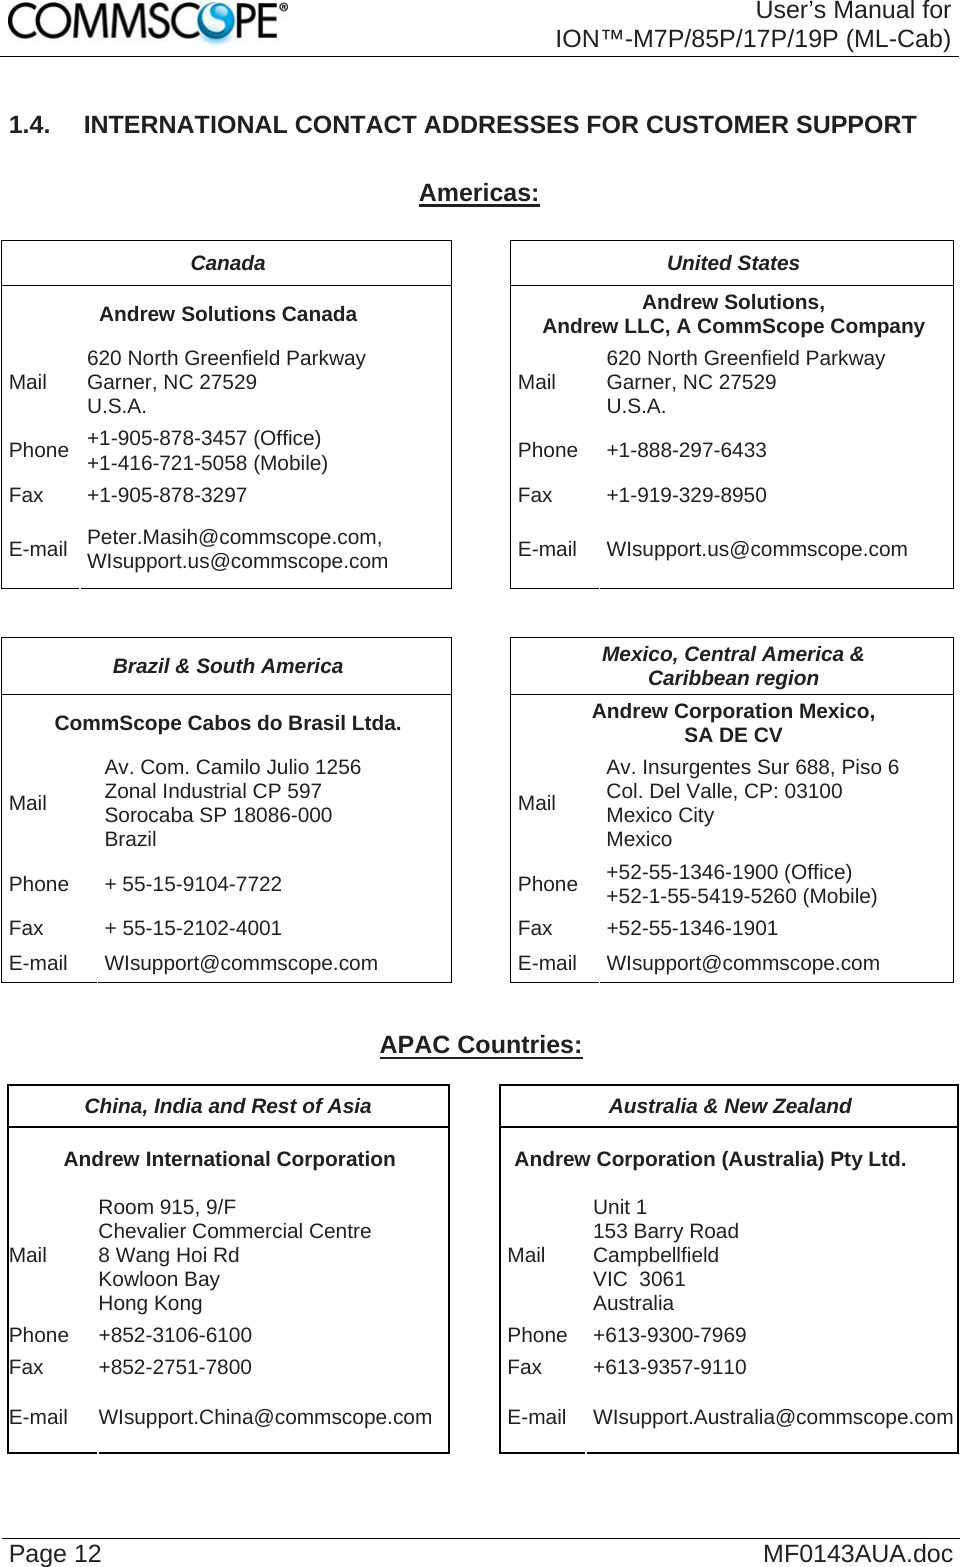  User’s Manual for ION™-M7P/85P/17P/19P (ML-Cab) Page 12  MF0143AUA.doc 1.4.  INTERNATIONAL CONTACT ADDRESSES FOR CUSTOMER SUPPORT  Americas:  Canada United States Andrew Solutions Canada  Andrew Solutions,  Andrew LLC, A CommScope Company Mail  620 North Greenfield Parkway Garner, NC 27529 U.S.A.  Mail  620 North Greenfield Parkway Garner, NC 27529 U.S.A. Phone  +1-905-878-3457 (Office) +1-416-721-5058 (Mobile) Phone +1-888-297-6433 Fax +1-905-878-3297  Fax  +1-919-329-8950 E-mail  Peter.Masih@commscope.com, WIsupport.us@commscope.com  E-mail WIsupport.us@commscope.com   Brazil &amp; South America  Mexico, Central America &amp;  Caribbean region CommScope Cabos do Brasil Ltda.  Andrew Corporation Mexico,  SA DE CV Mail Av. Com. Camilo Julio 1256 Zonal Industrial CP 597 Sorocaba SP 18086-000 Brazil Mail Av. Insurgentes Sur 688, Piso 6 Col. Del Valle, CP: 03100 Mexico City Mexico Phone + 55-15-9104-7722  Phone +52-55-1346-1900 (Office) +52-1-55-5419-5260 (Mobile) Fax + 55-15-2102-4001  Fax +52-55-1346-1901 E-mail WIsupport@commscope.com  E-mail WIsupport@commscope.com   APAC Countries:  China, India and Rest of Asia  Australia &amp; New Zealand Andrew International Corporation  Andrew Corporation (Australia) Pty Ltd. Mail Room 915, 9/F  Chevalier Commercial Centre 8 Wang Hoi Rd Kowloon Bay  Hong Kong Mail Unit 1 153 Barry Road Campbellfield  VIC  3061 Australia Phone +852-3106-6100  Phone +613-9300-7969 Fax +852-2751-7800  Fax +613-9357-9110 E-mail WIsupport.China@commscope.com  E-mail WIsupport.Australia@commscope.com 